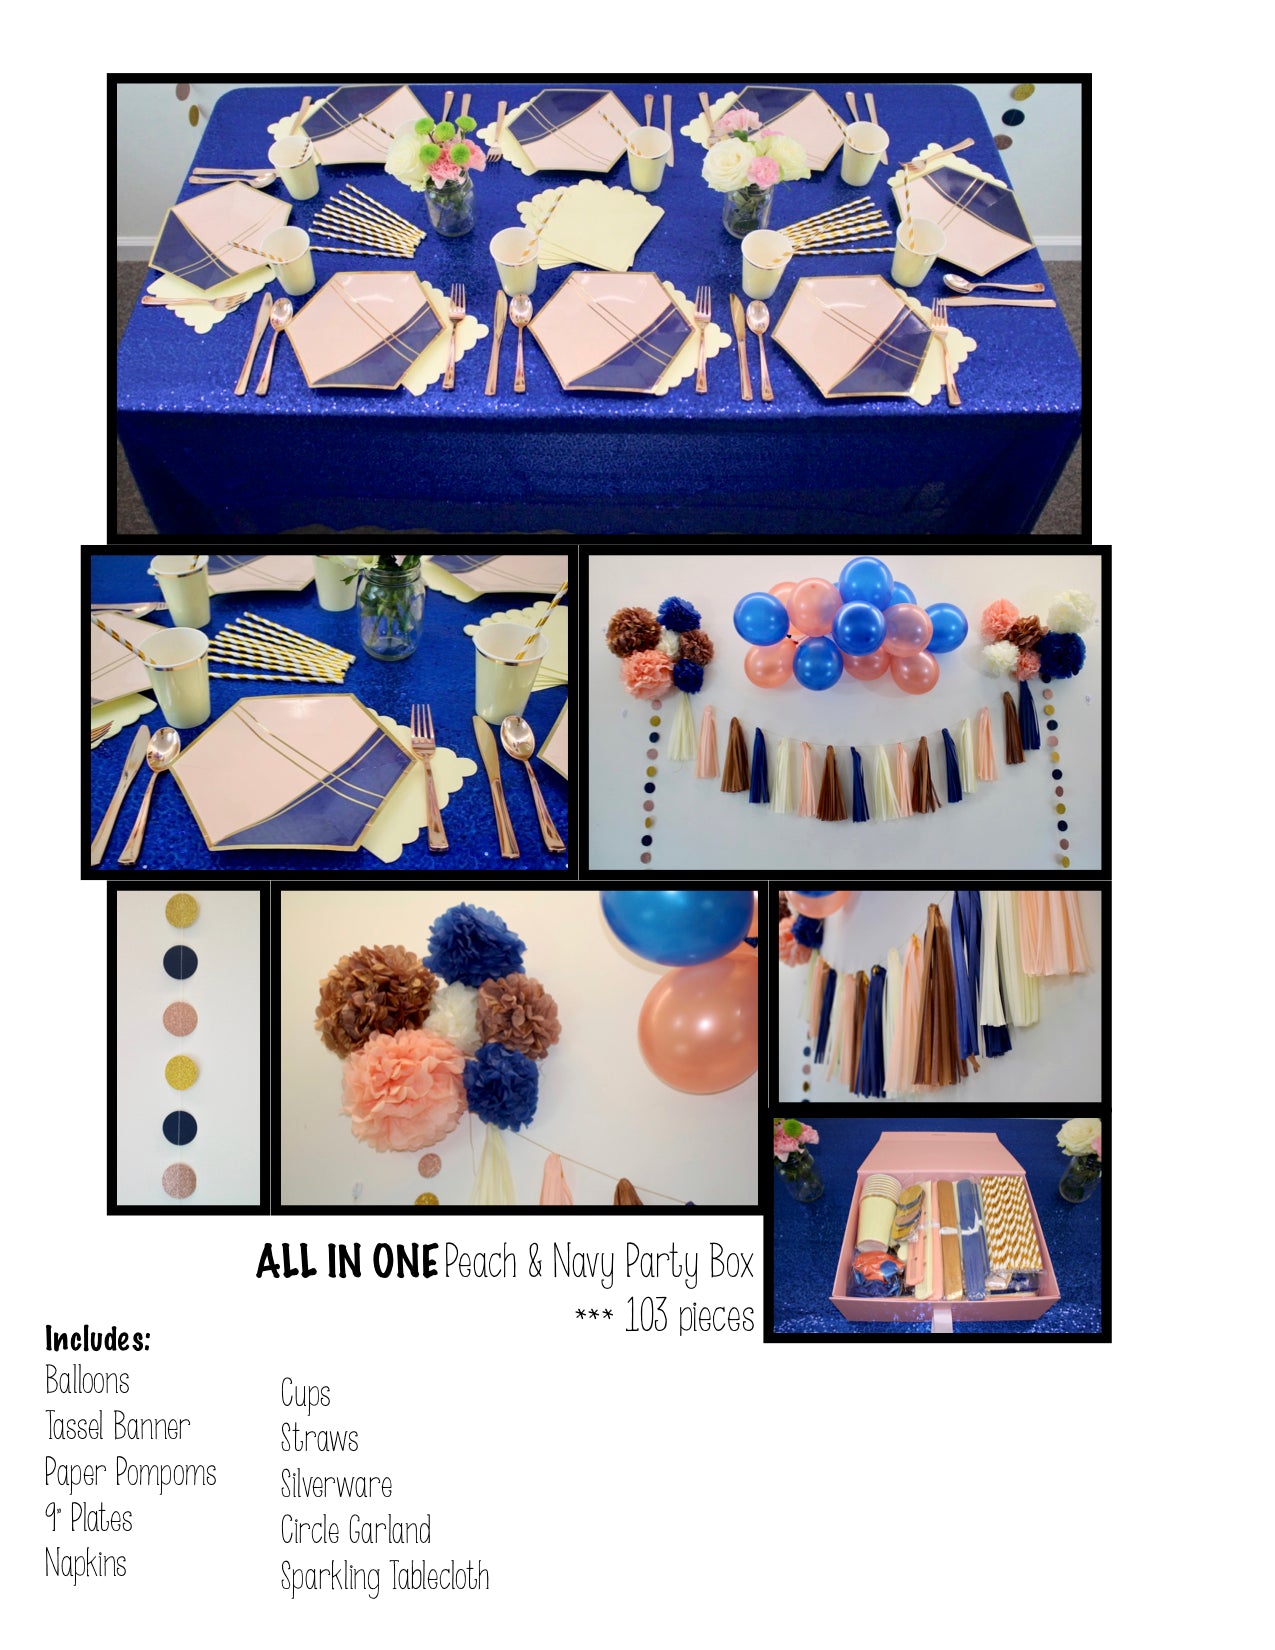 Pink & Navy Party Box